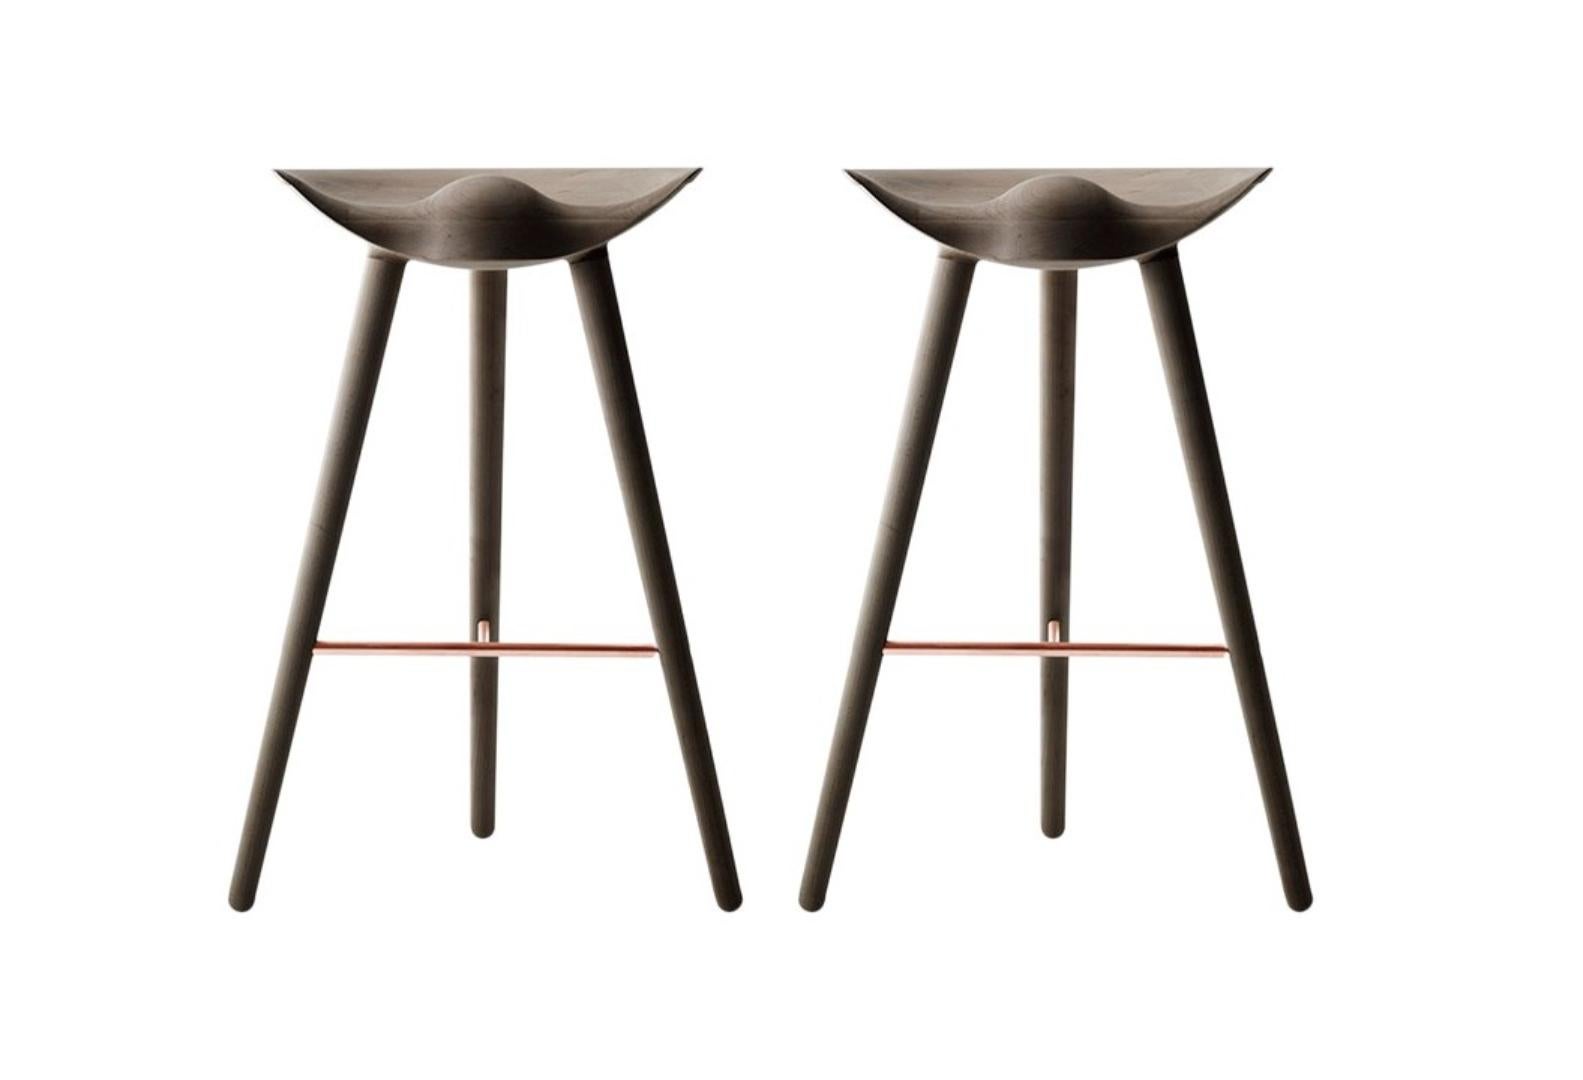 Set of 2 brown oak and copper bar stools by Lassen
Dimensions: H 77 x W 36 x L 55.5 cm
Materials: Oak, Brass

In 1942 Mogens Lassen designed the Stool ML42 as a piece for a furniture exhibition held at the Danish Museum of Decorative Art. He